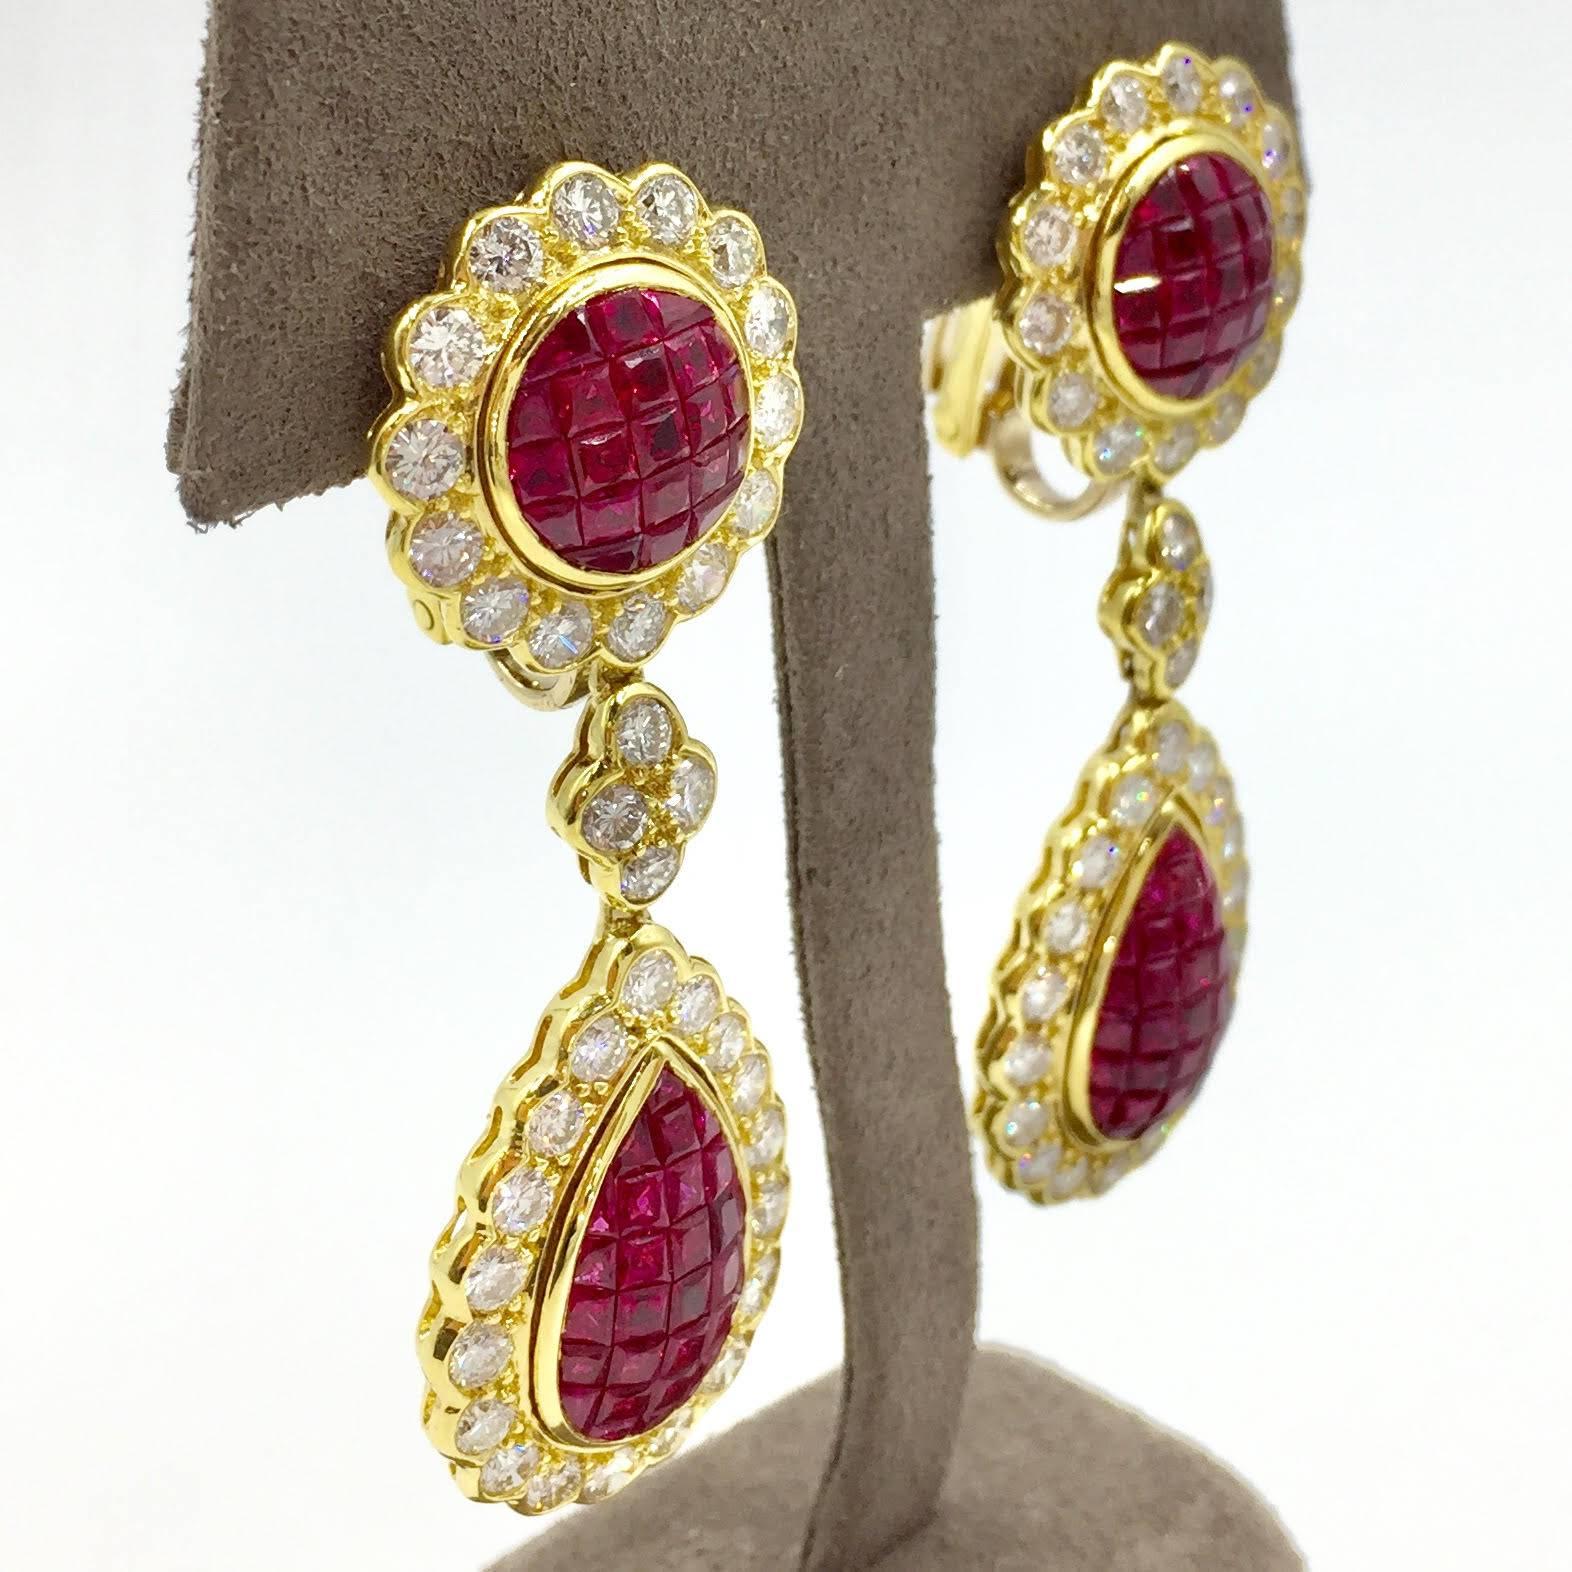 A true statement drop earring set in 18K yellow gold. Pear shaped design drop. Vivid rubies are beautifully invisibly set. Diamonds are of very nice color and clarity - approximately G color, VS2 clarity. Exceptional craftsmanship with an intricate